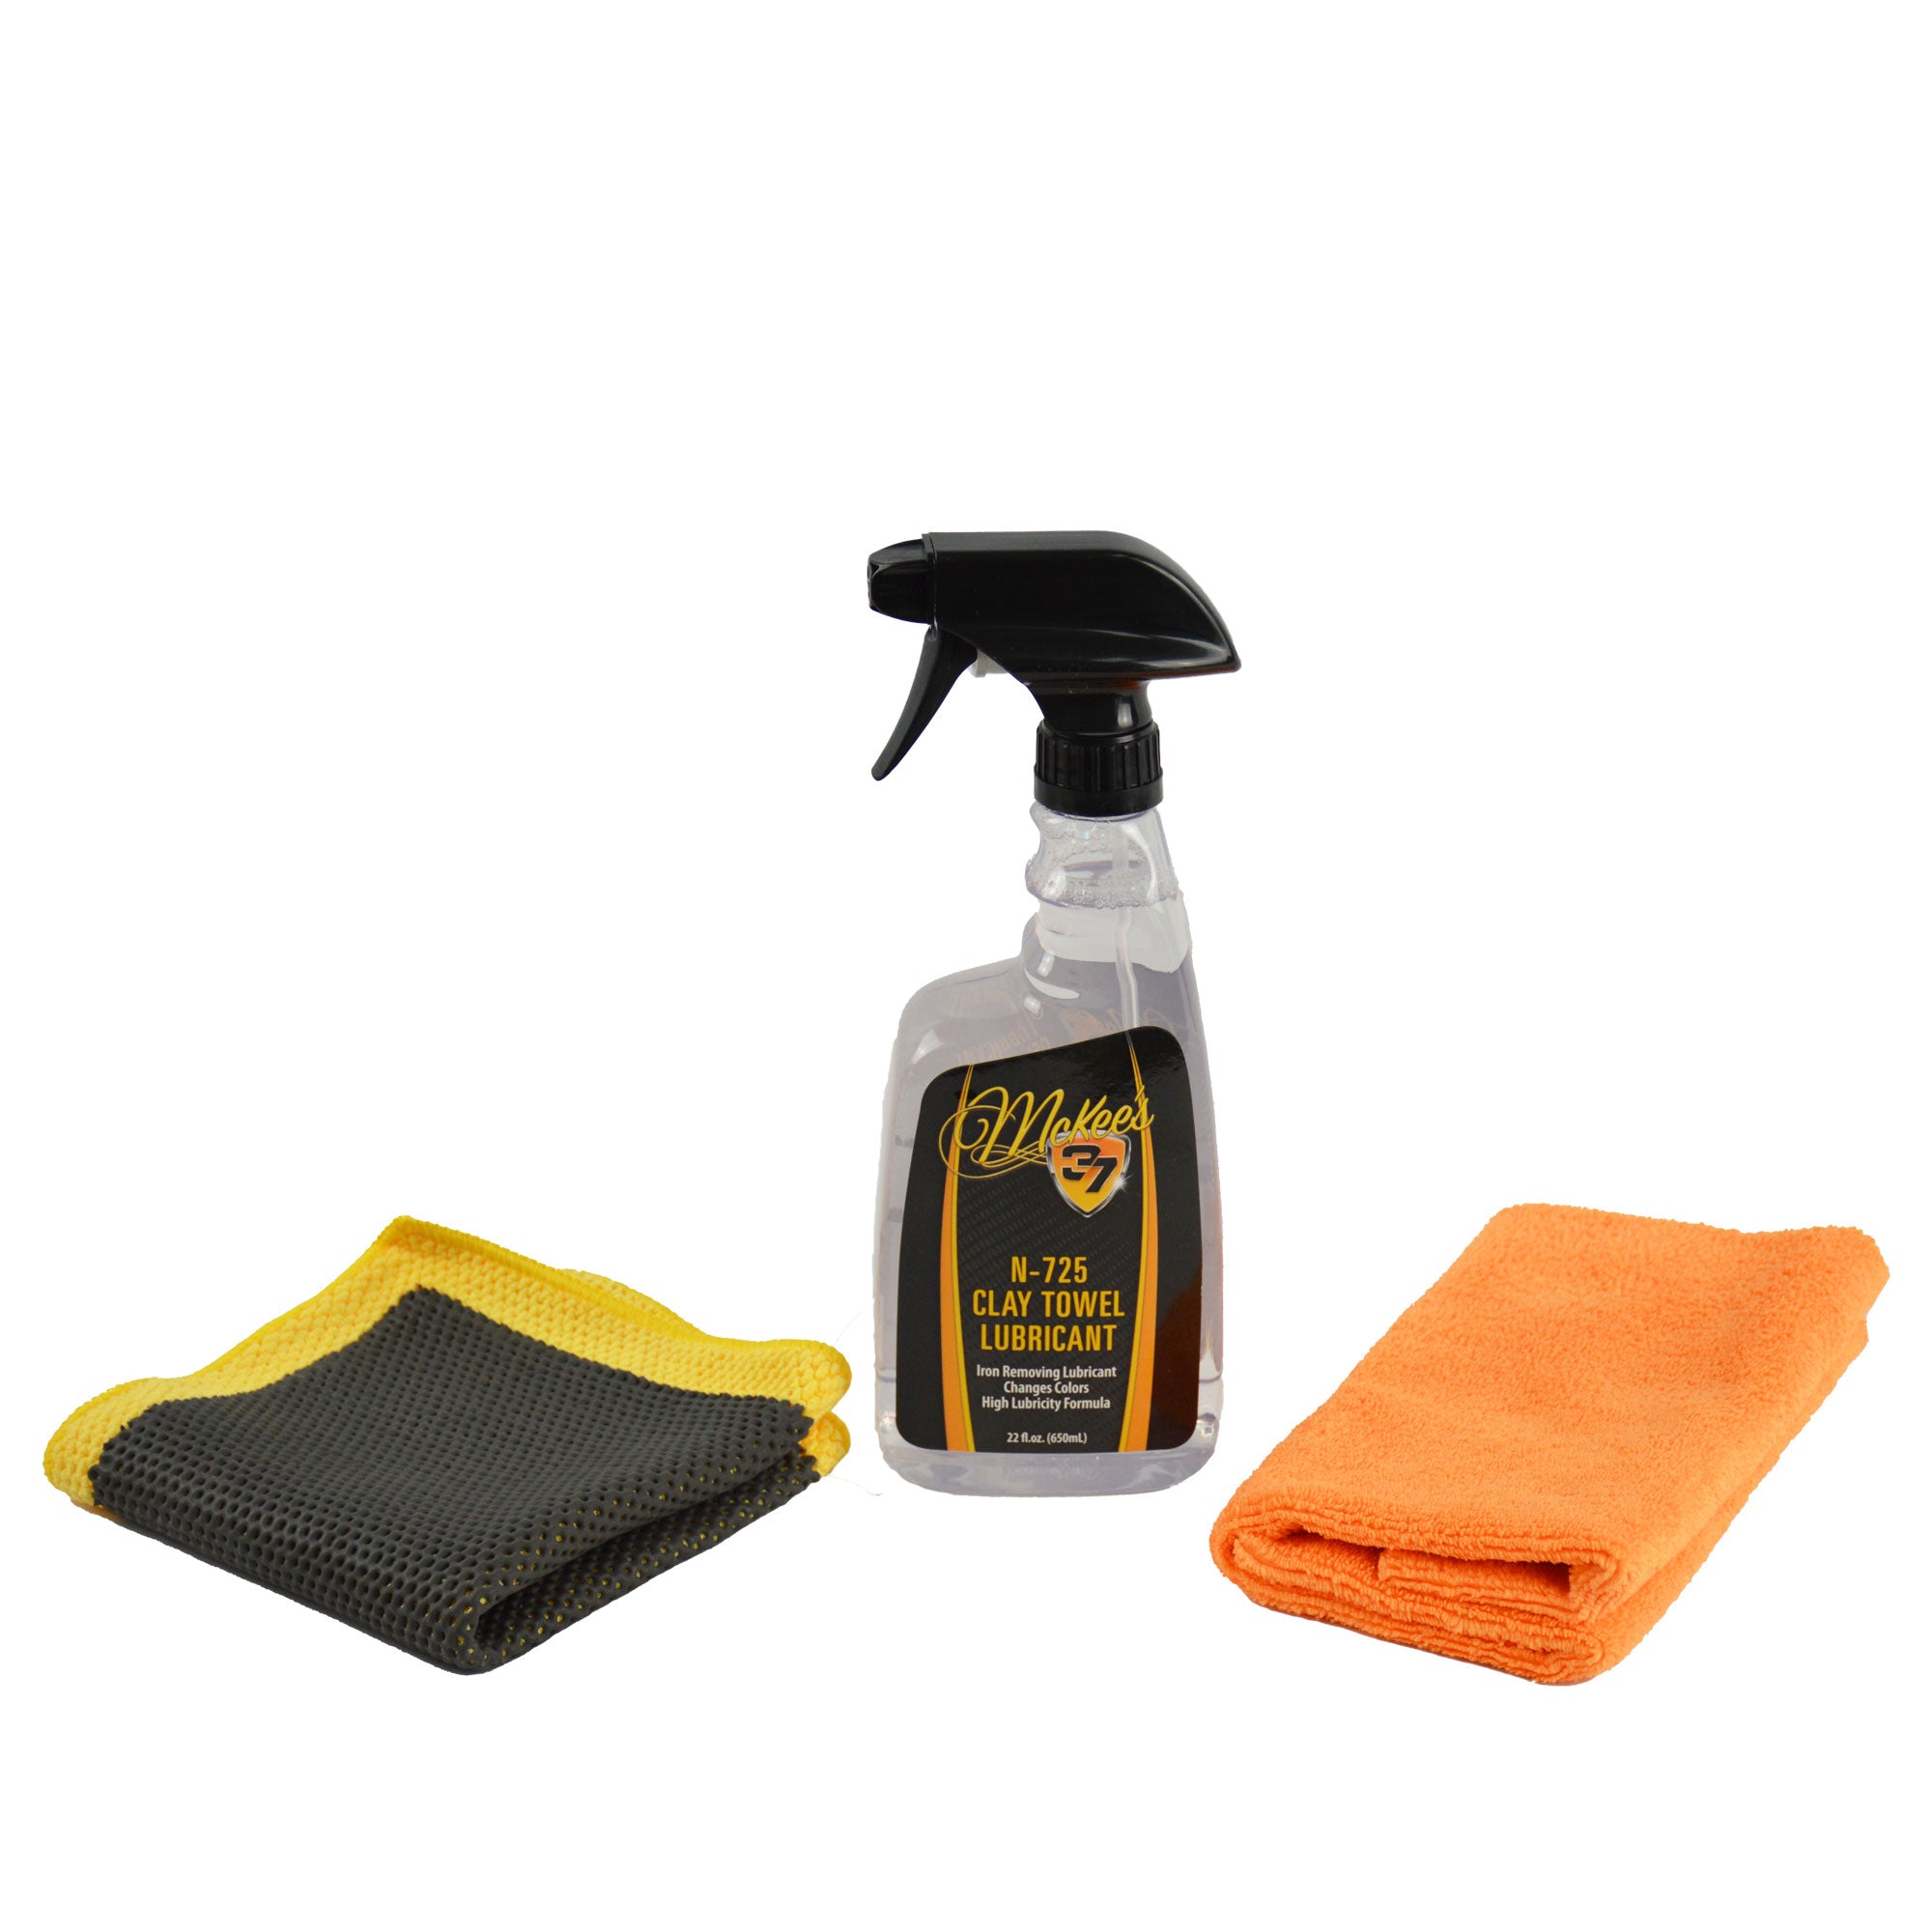 N-725 Clay Towel Lubricant Combo